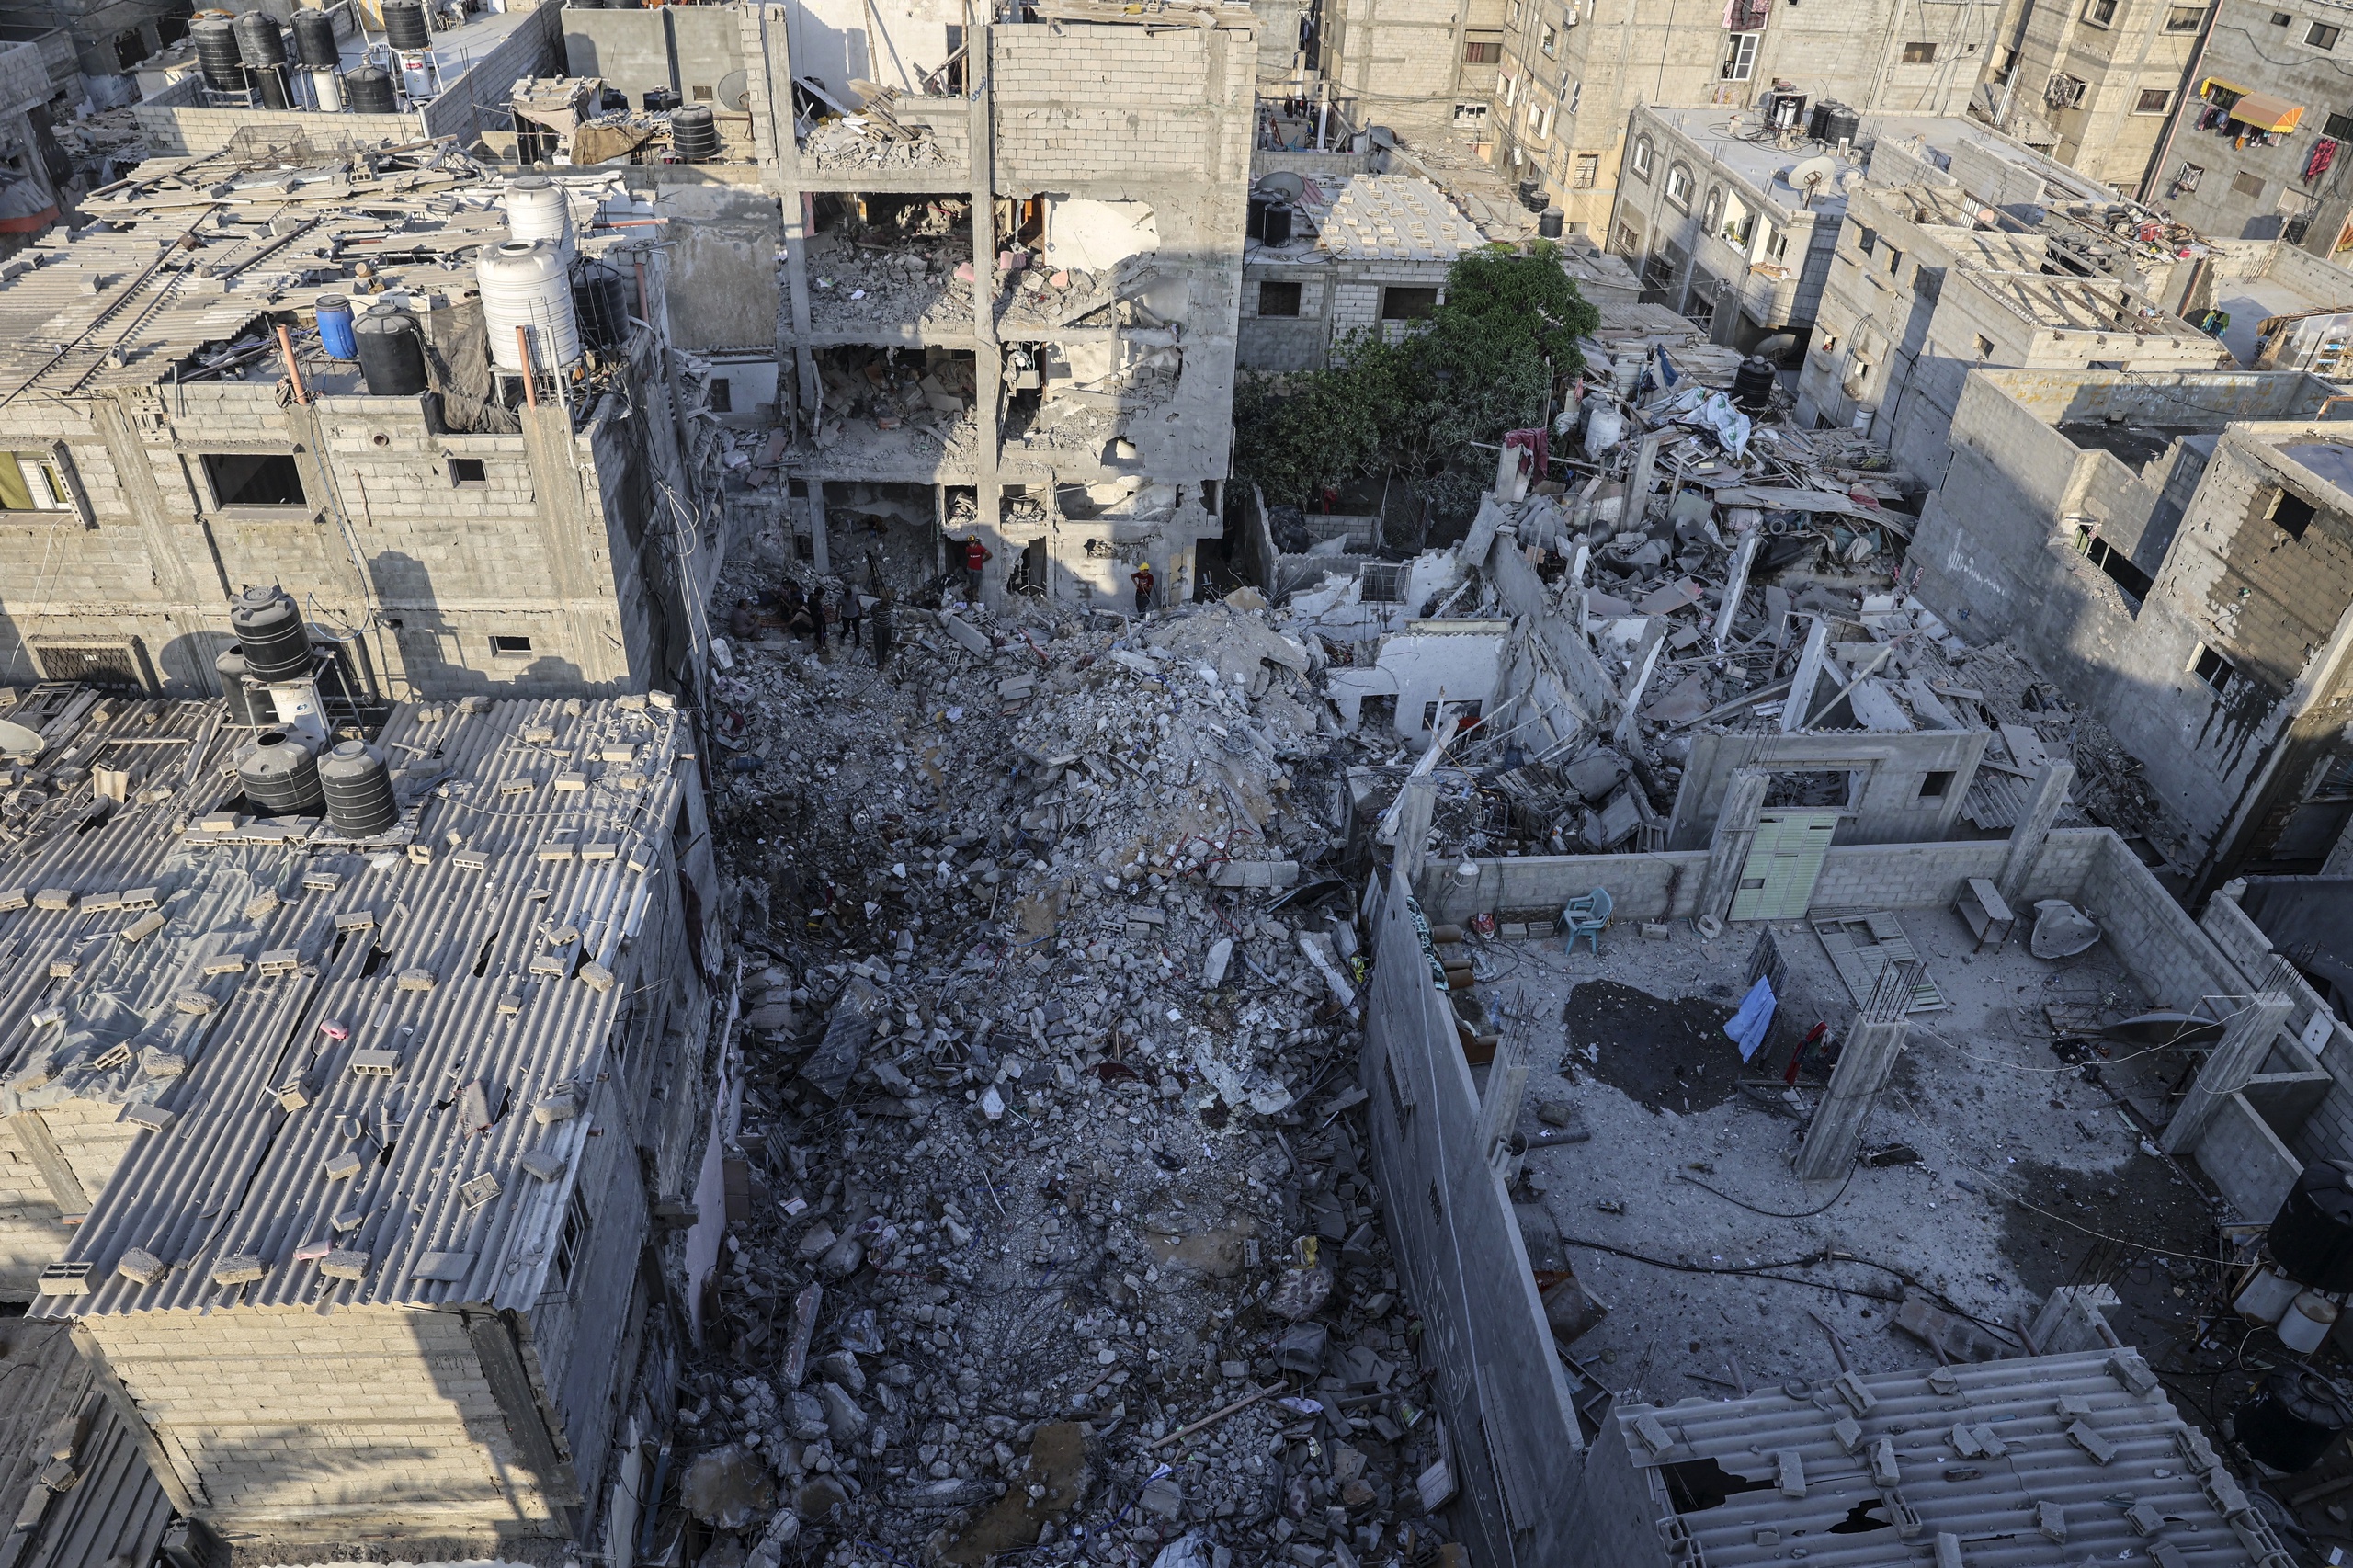 Palestinians search through the rubble of a building in which Khaled Mansour, a top Islamic Jihad militant died according to his movement, following an overnight Israeli air stike in Rafah in the southern Gaza strip, on August 7, 2022.  SAID KHATIB / AFP